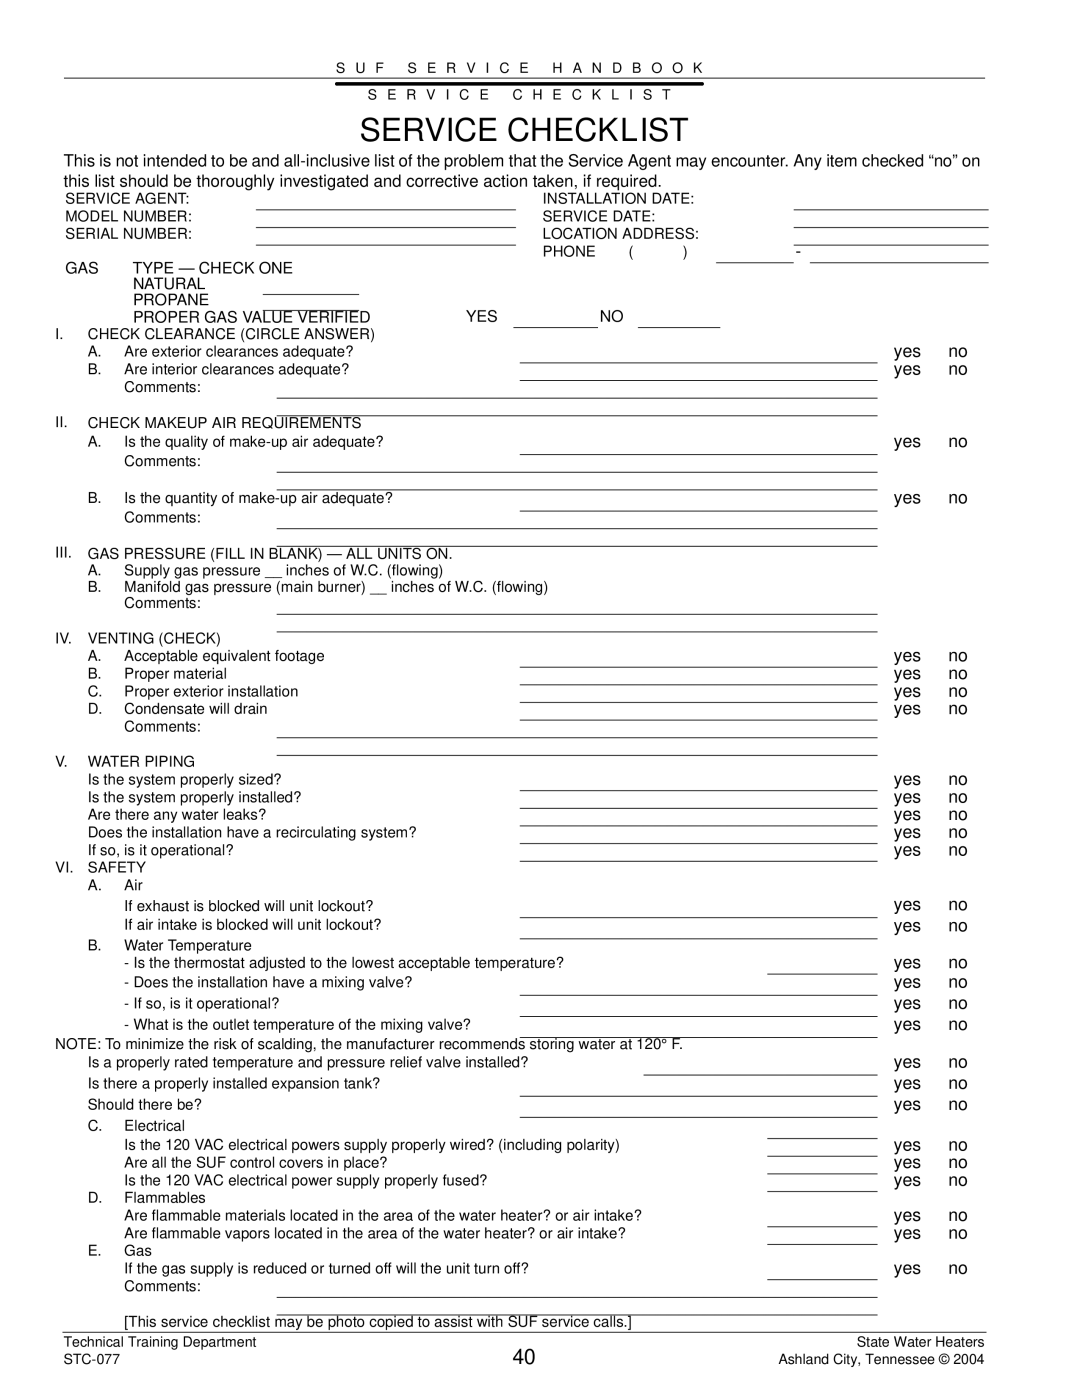 State Industries STC-077 dimensions Service Checklist, III. GAS Pressure Fill in Blank ALL Units on 